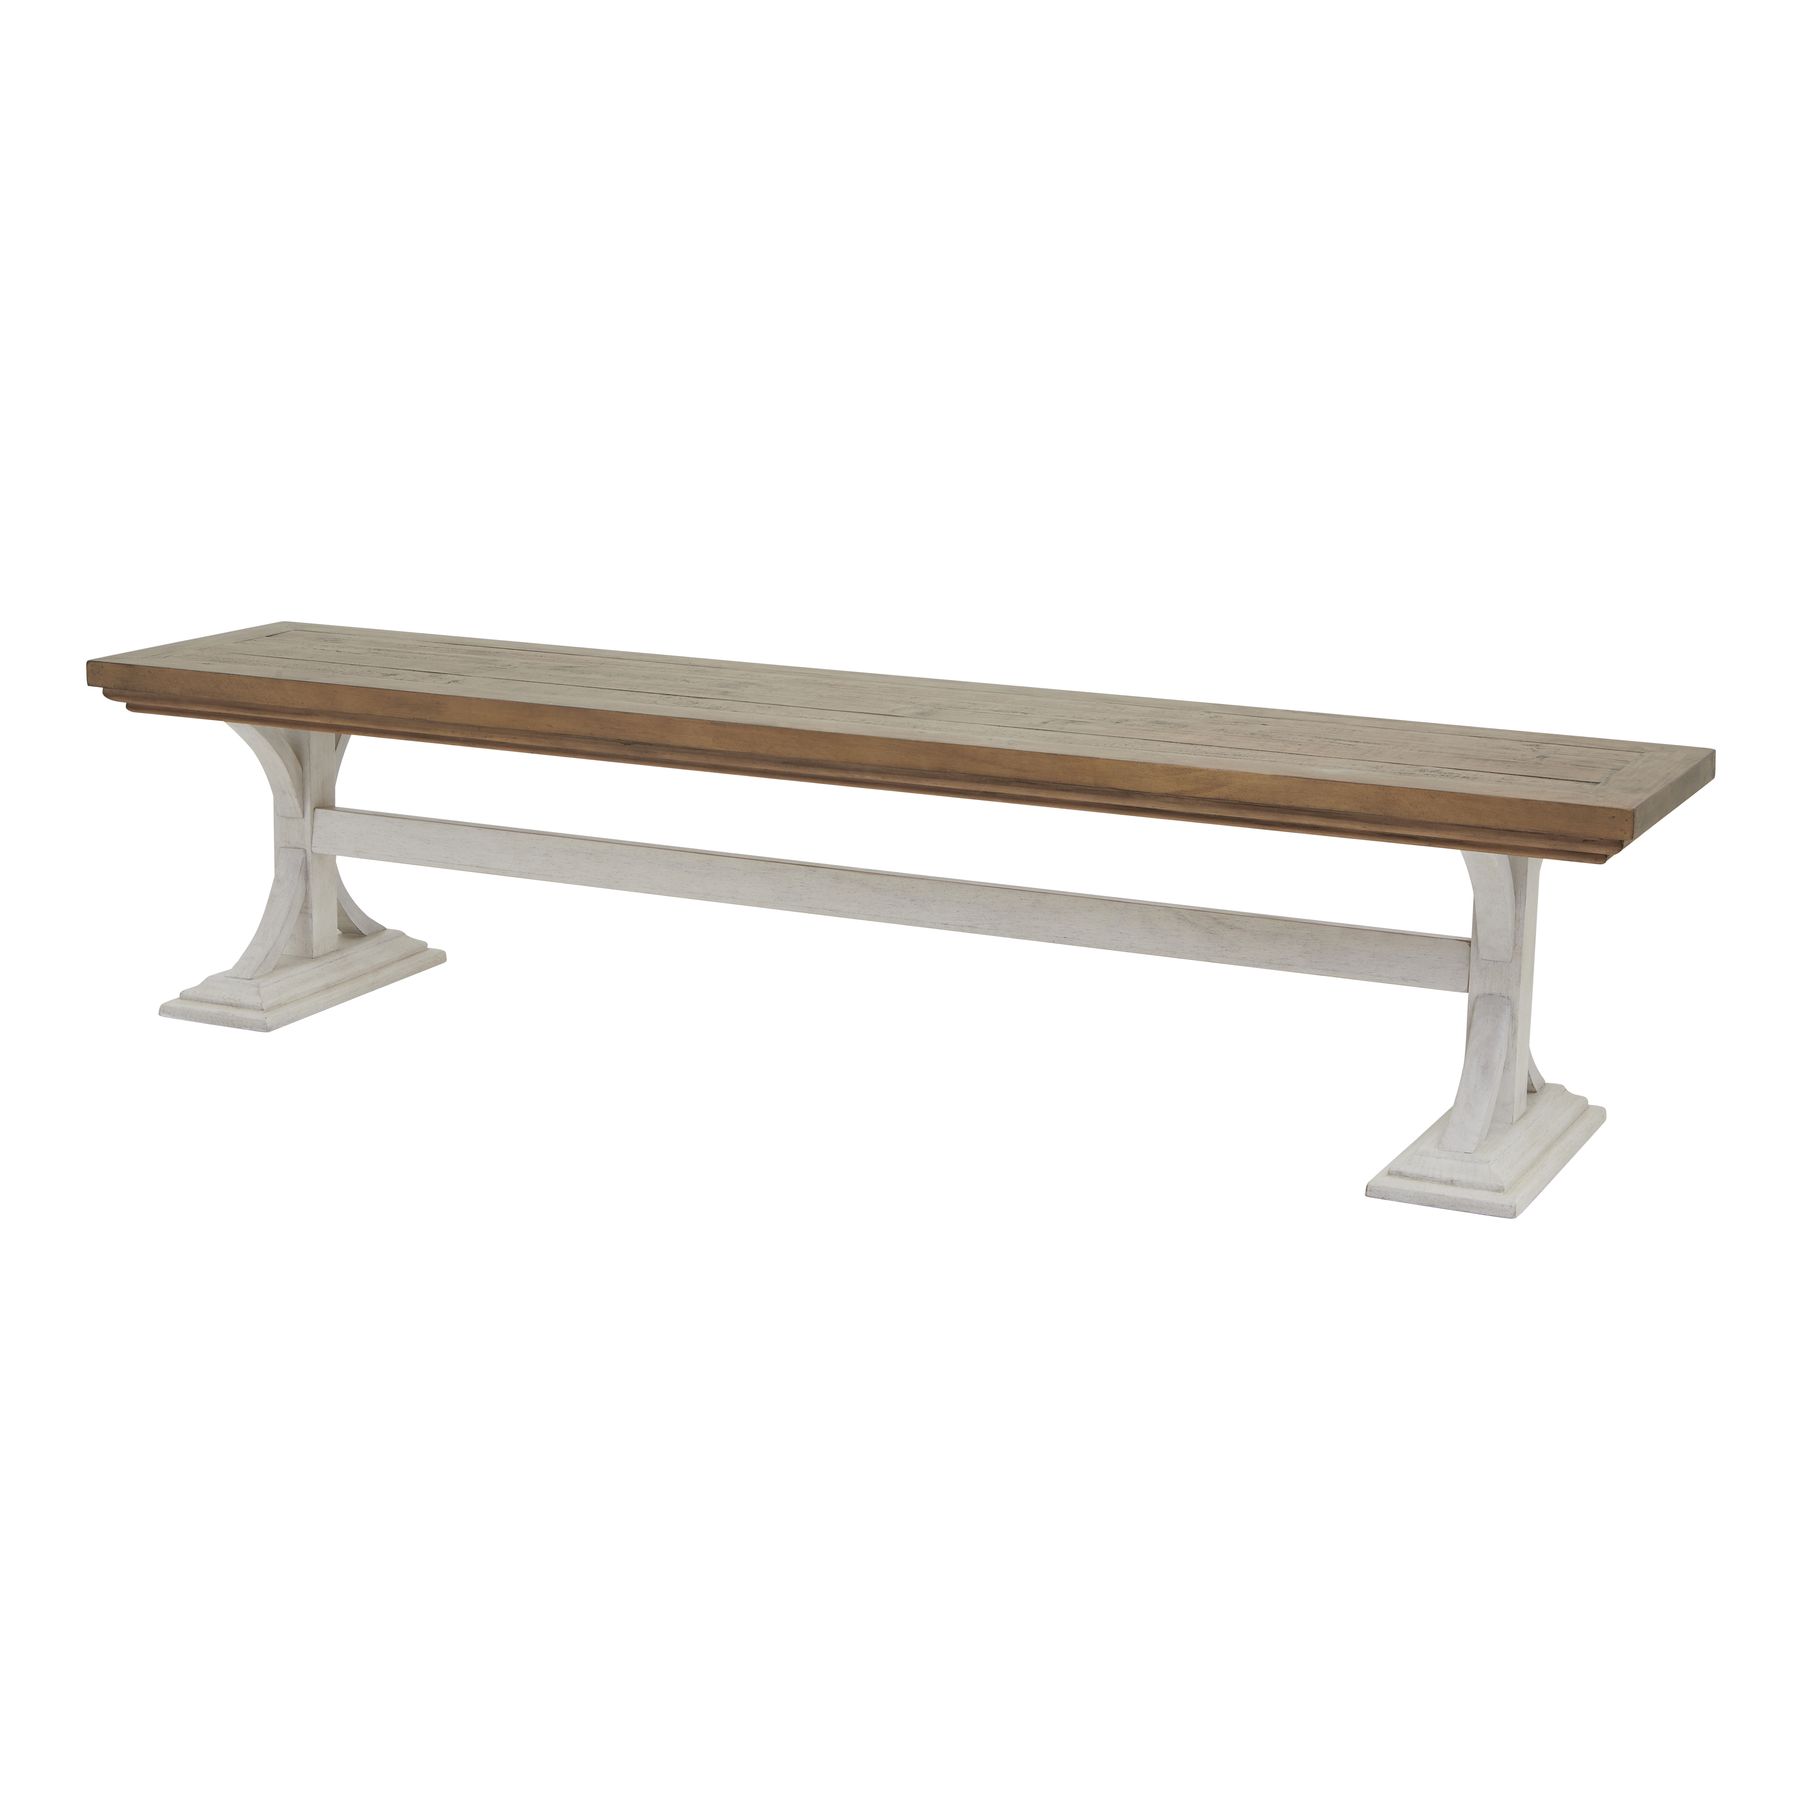 Luna Collection Dining Bench - Image 1